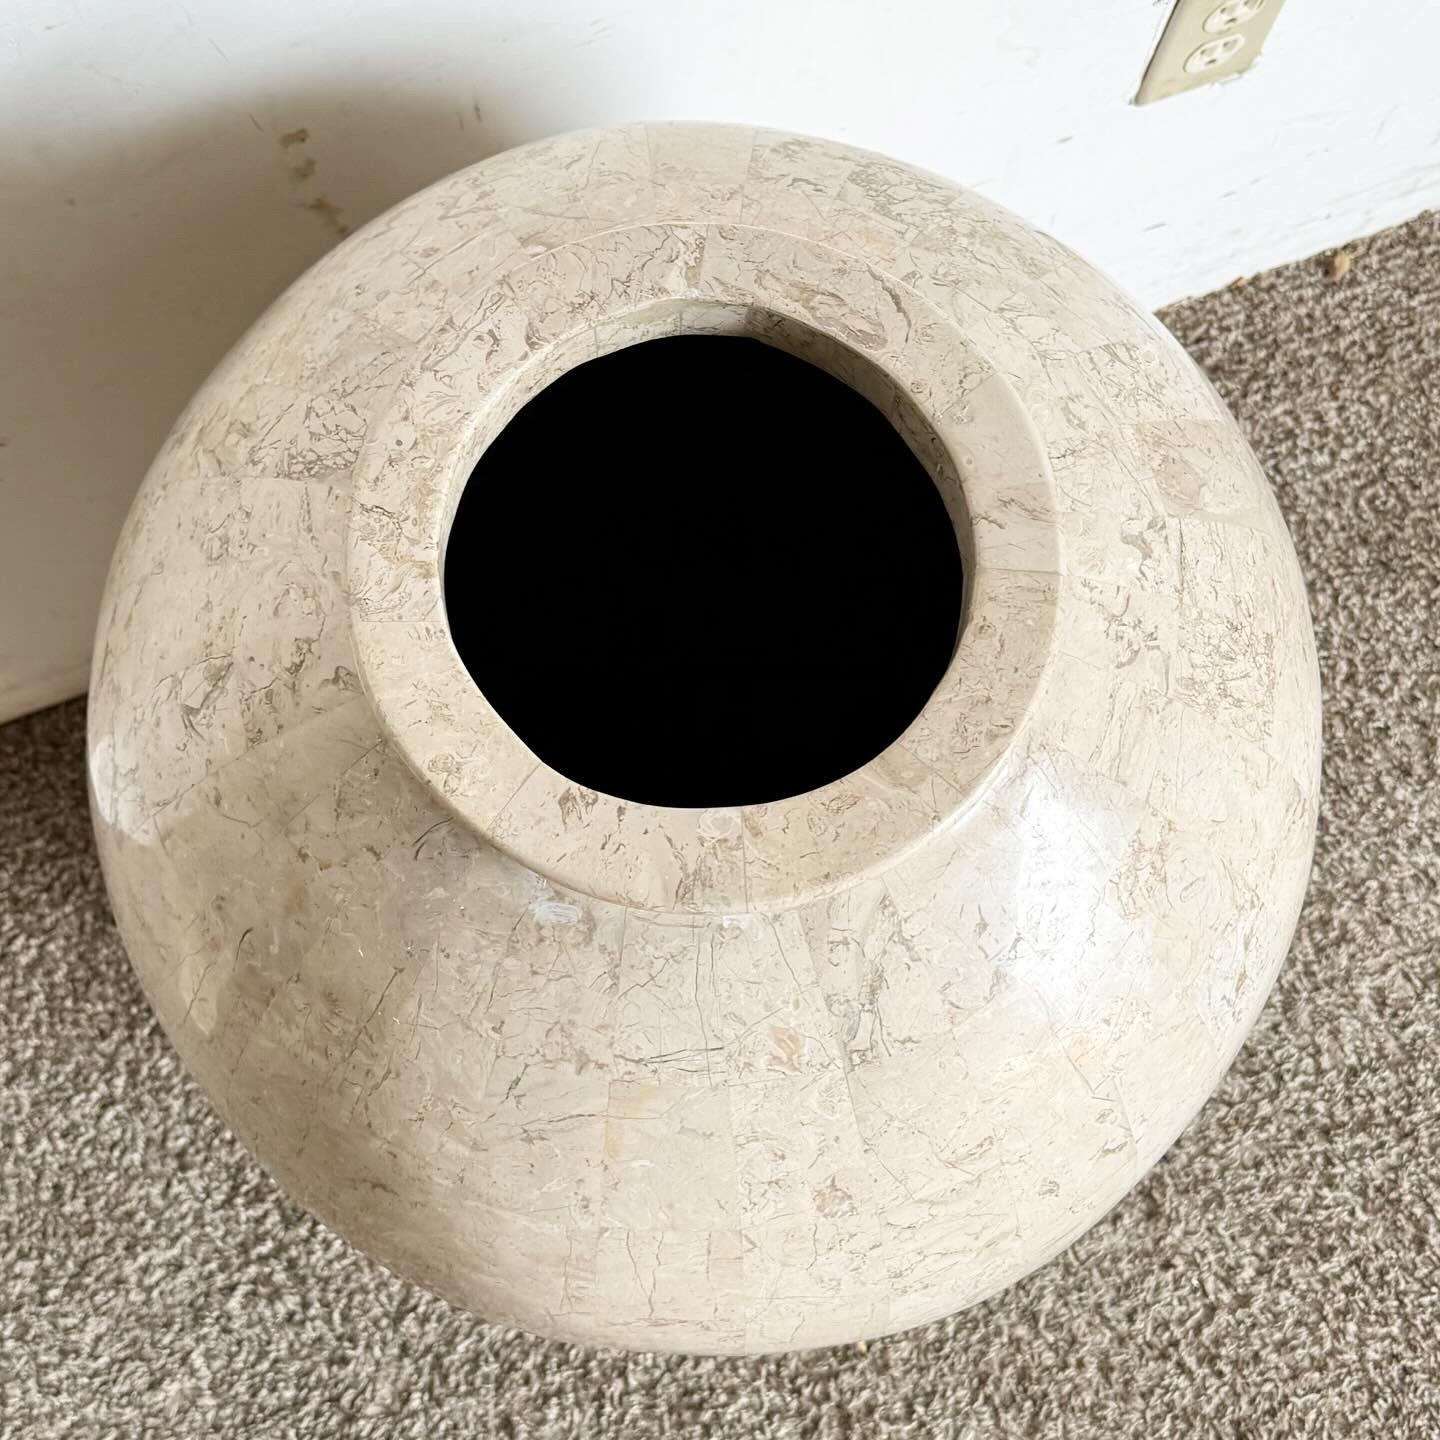 Elevate your decor with this Postmodern Polished and Raw Tessellated Stone Floor Vase. Featuring a mix of polished and raw stone, this vase offers a unique visual and textural contrast. Its geometric shapes and clean lines are perfect for